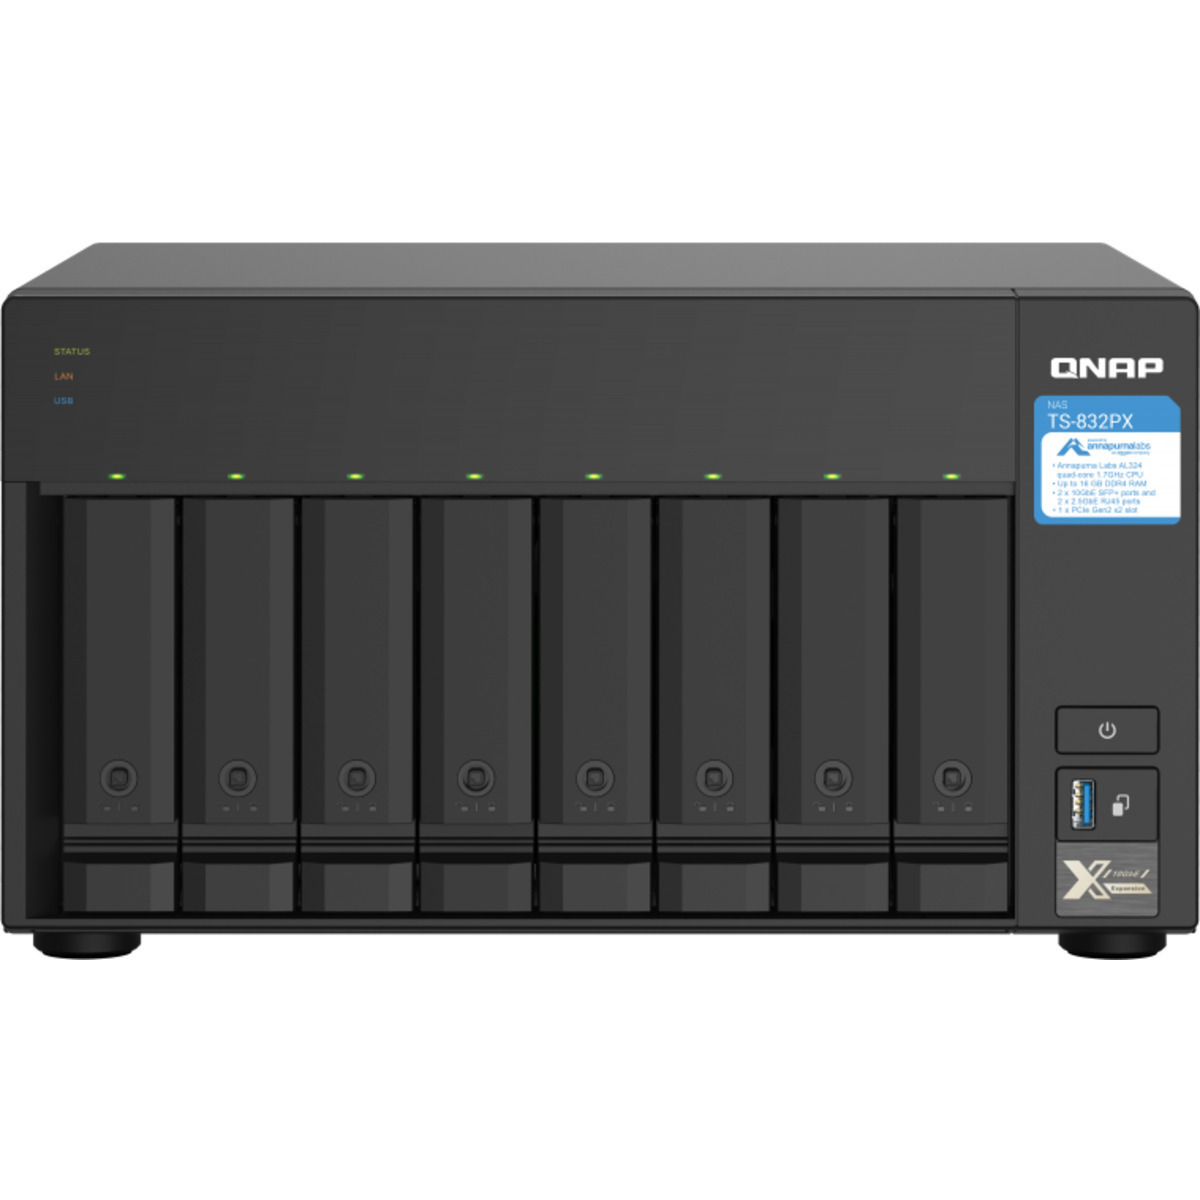 QNAP TS-832PX 20tb 8-Bay Desktop Multimedia / Power User / Business NAS - Network Attached Storage Device 5x4tb Seagate IronWolf ST4000VN006 3.5 5400rpm SATA 6Gb/s HDD NAS Class Drives Installed - Burn-In Tested - FREE RAM UPGRADE TS-832PX